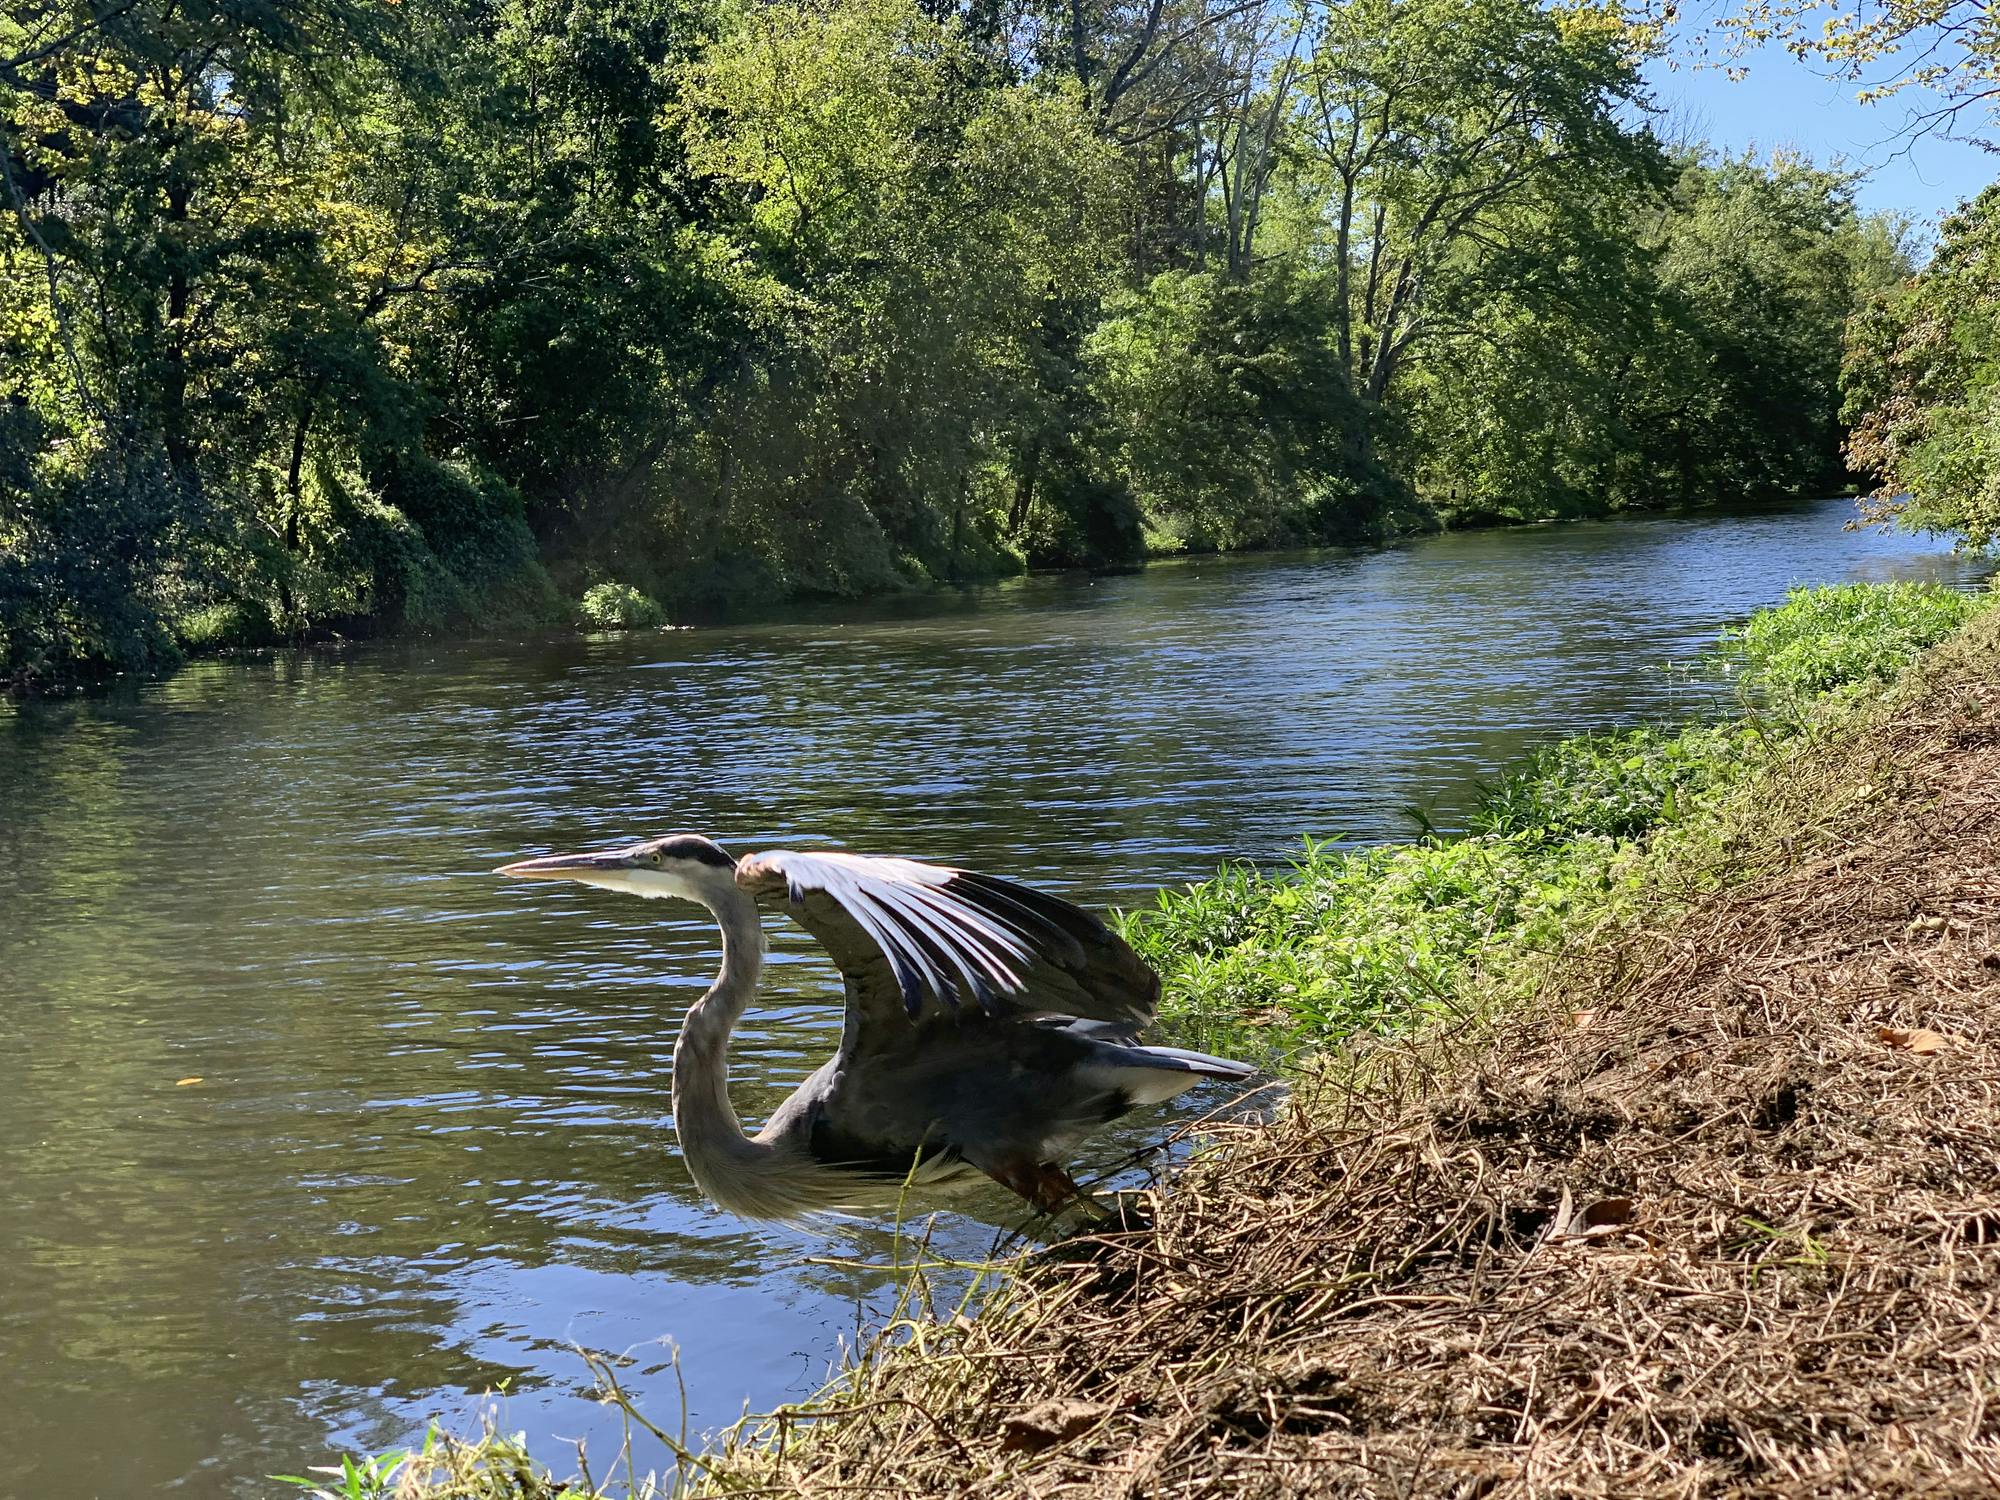 A great blue heron sits on the bank of a river. The trees across the river are green and full of leaves.